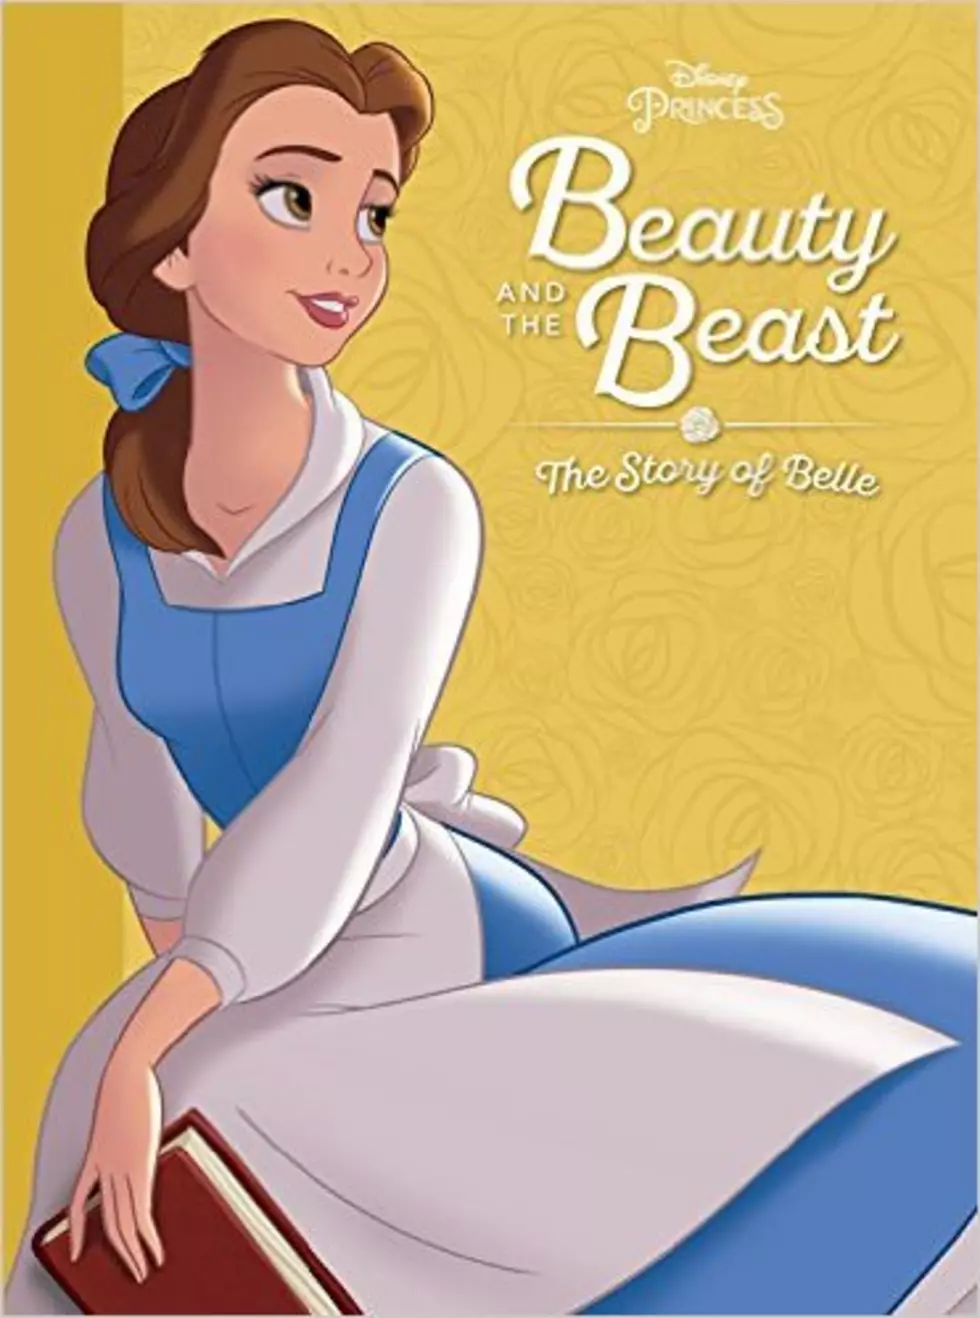 Belle to Visit Barnes &#038; Noble to Celebrate ‘Beauty and the Beast’